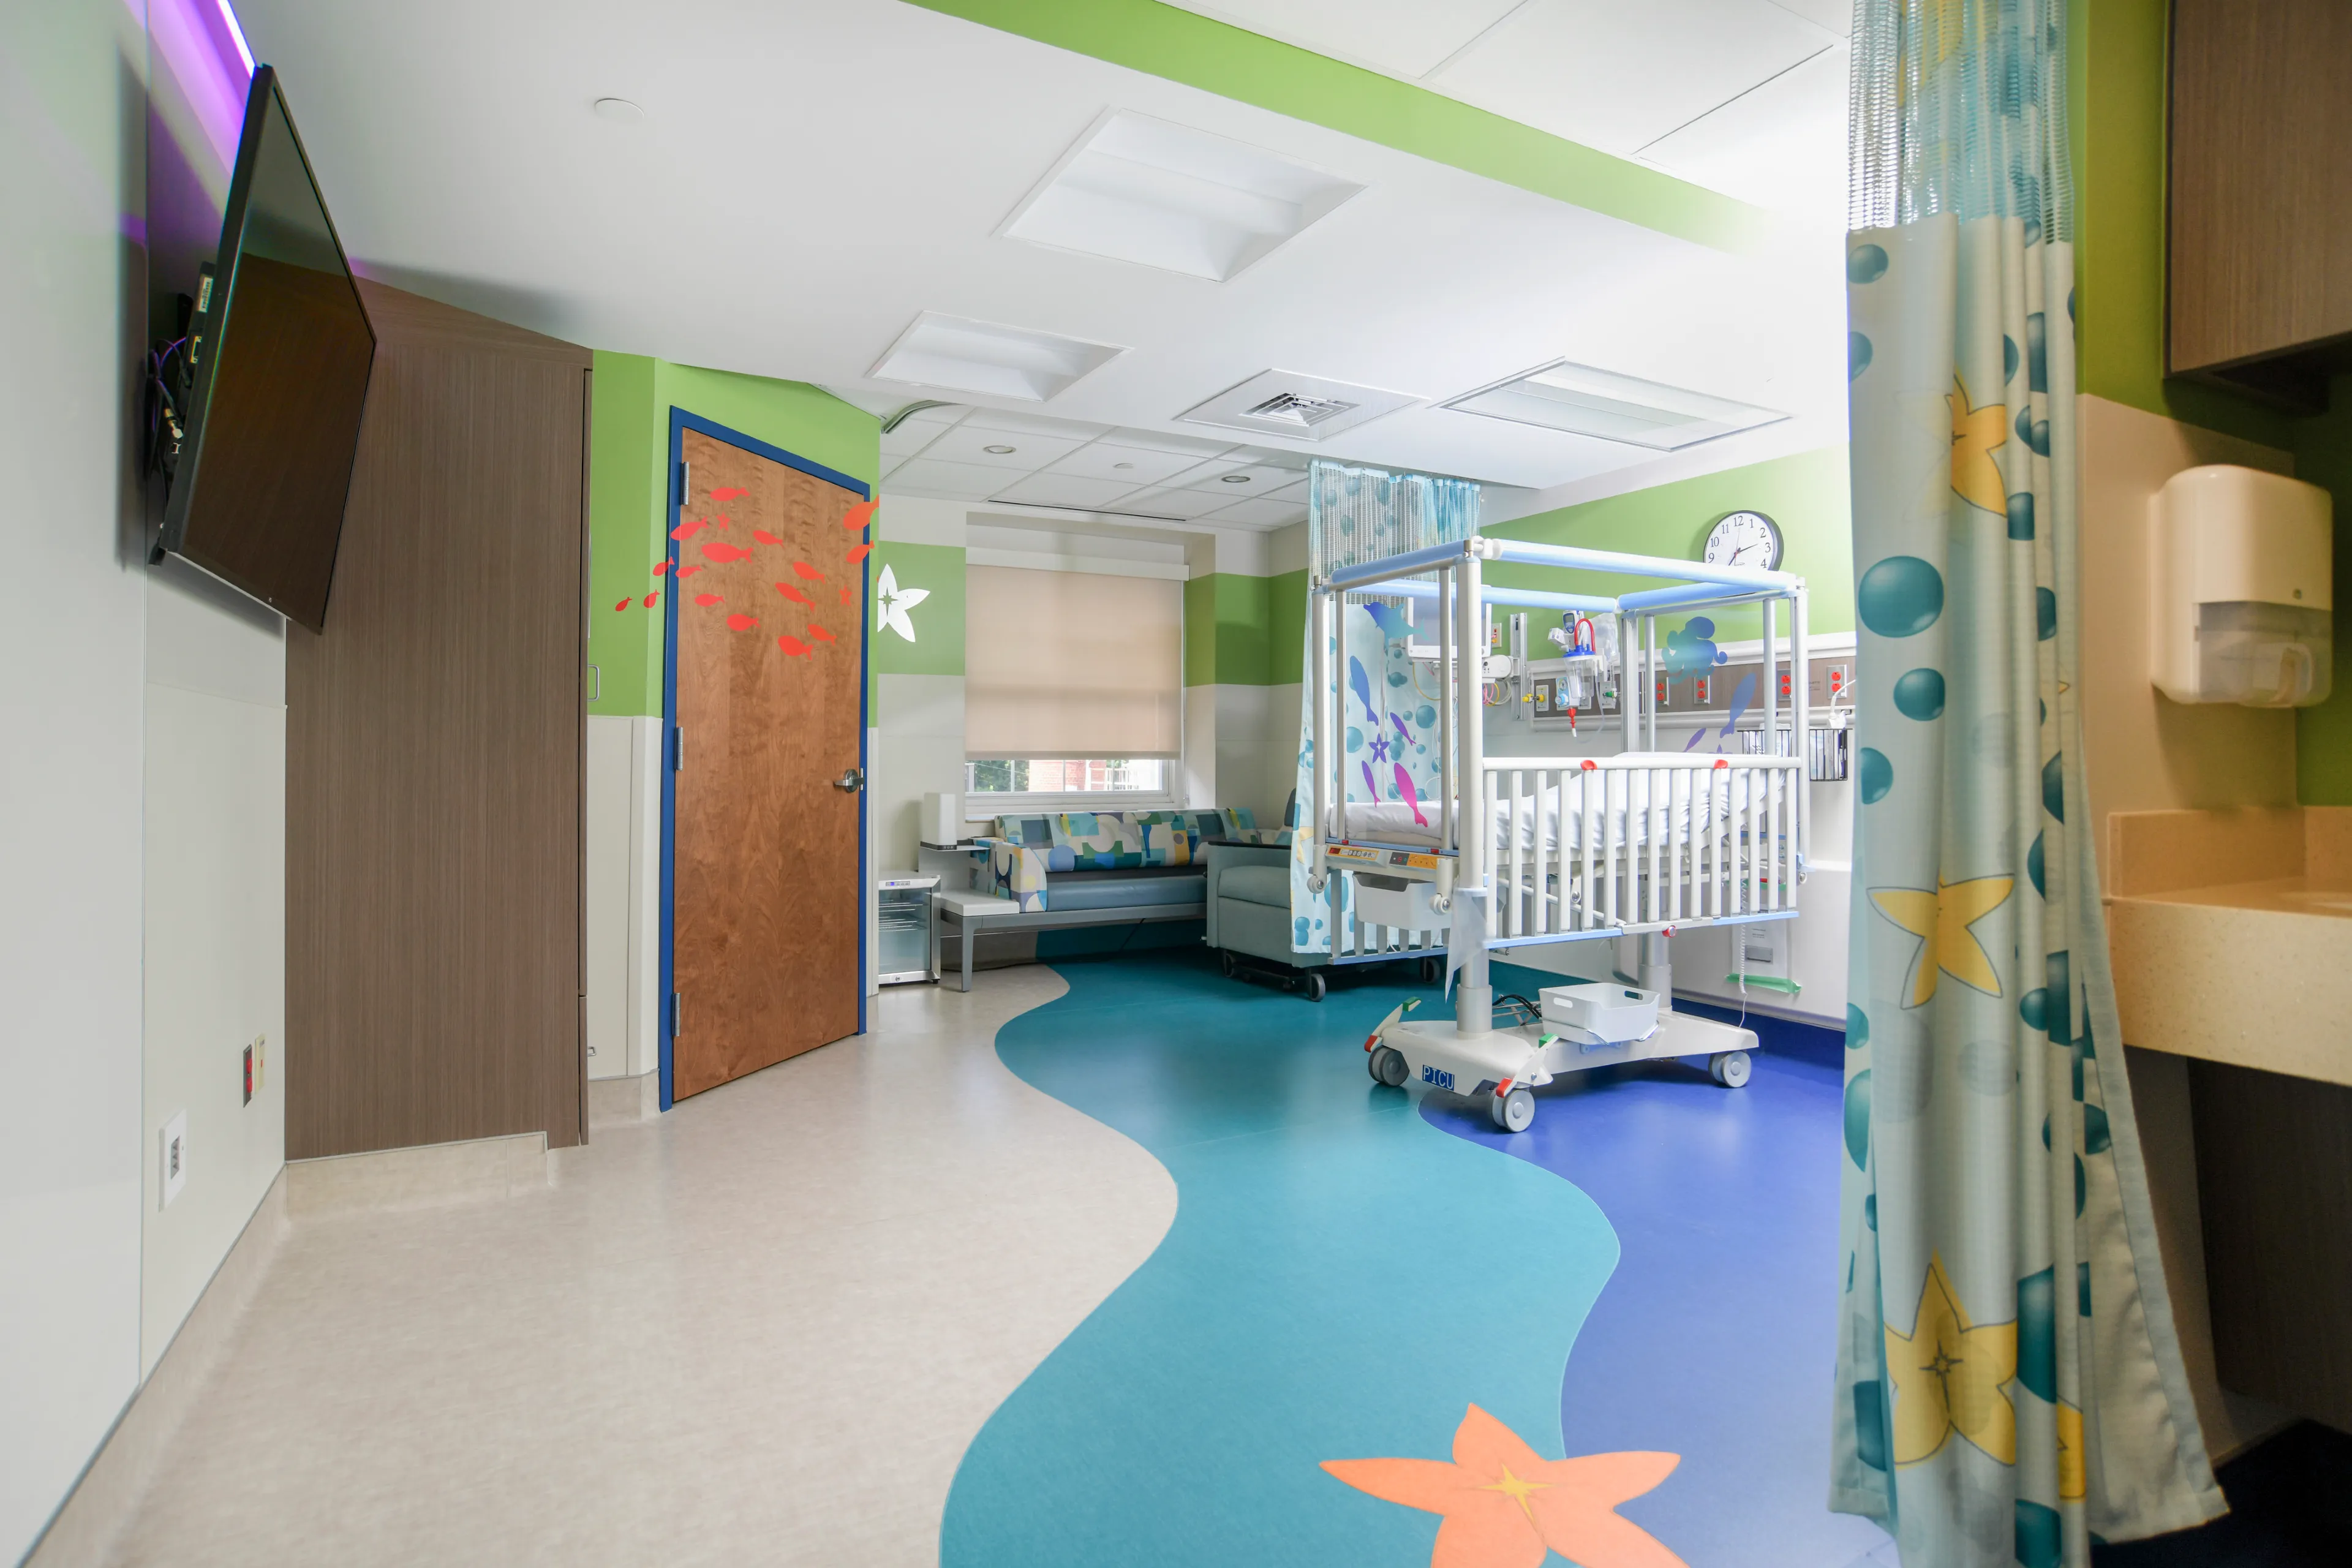 Underwater themed hospital room with a  toddler crib